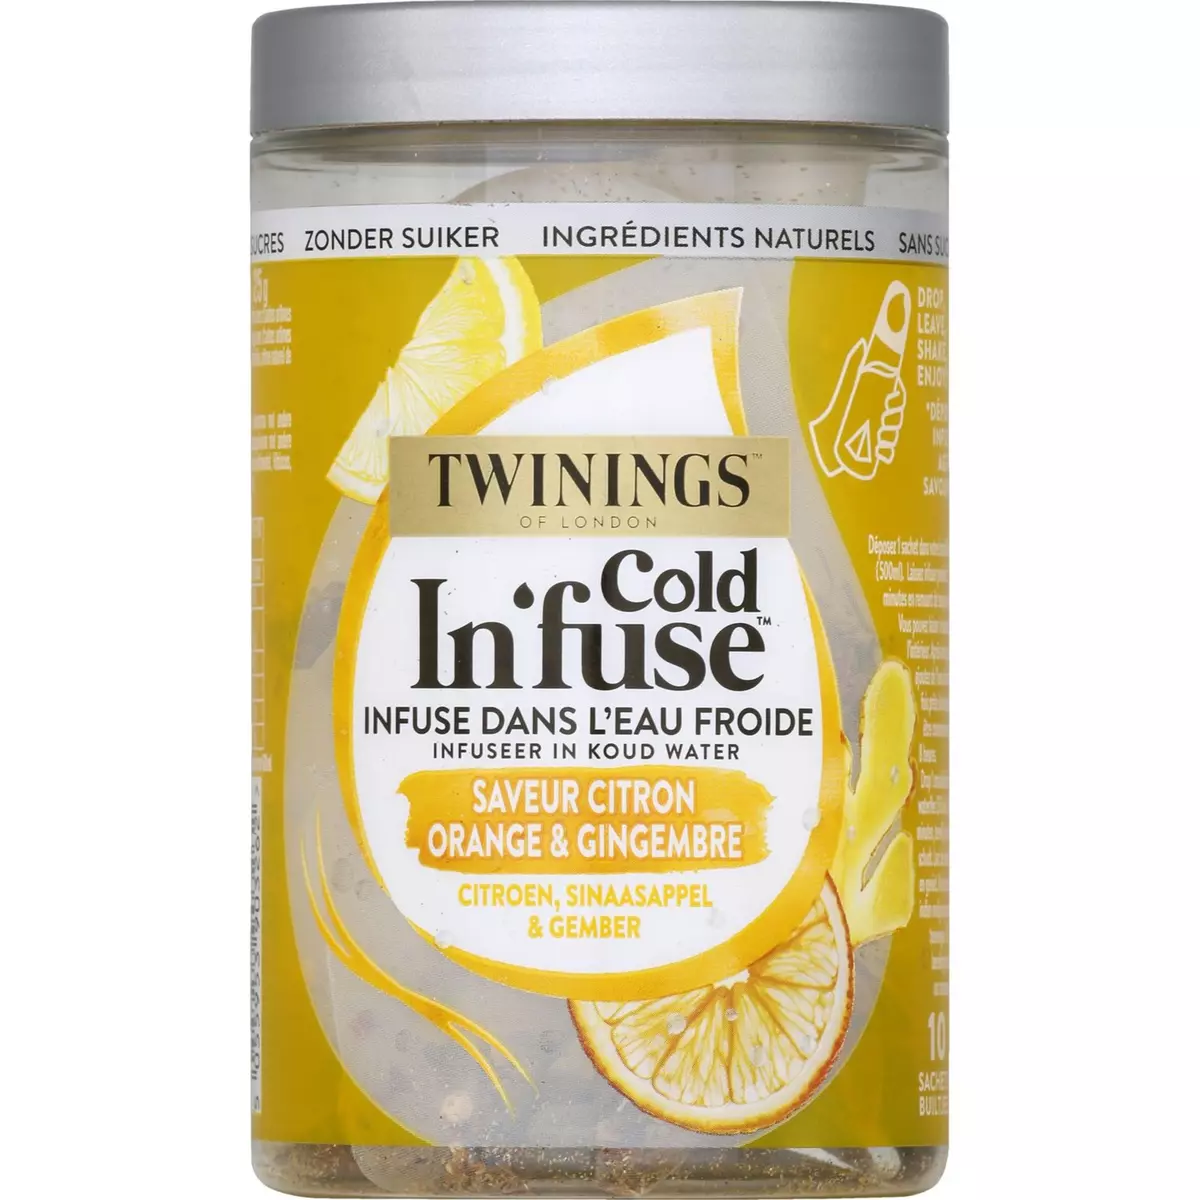 TWININGS Cold In'fuse infusion froide saveur citron orange gingembre 10 sachets 25g